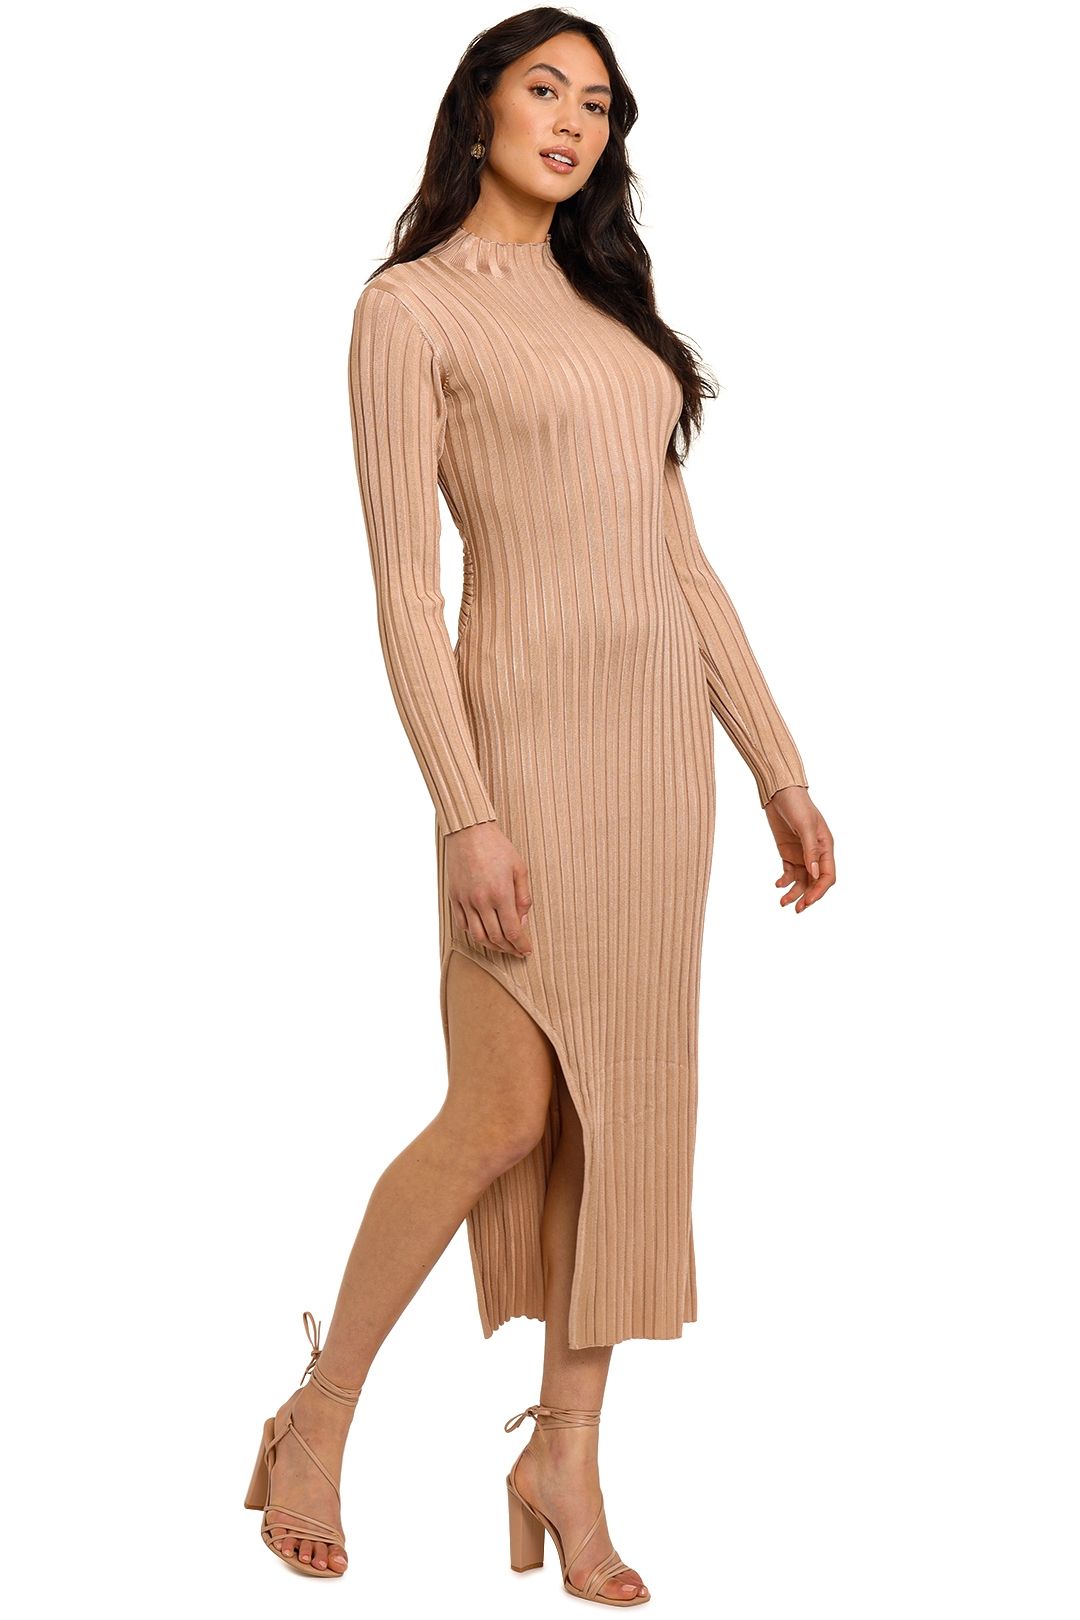 Significant Other Sylvia Knit Dress Champagne